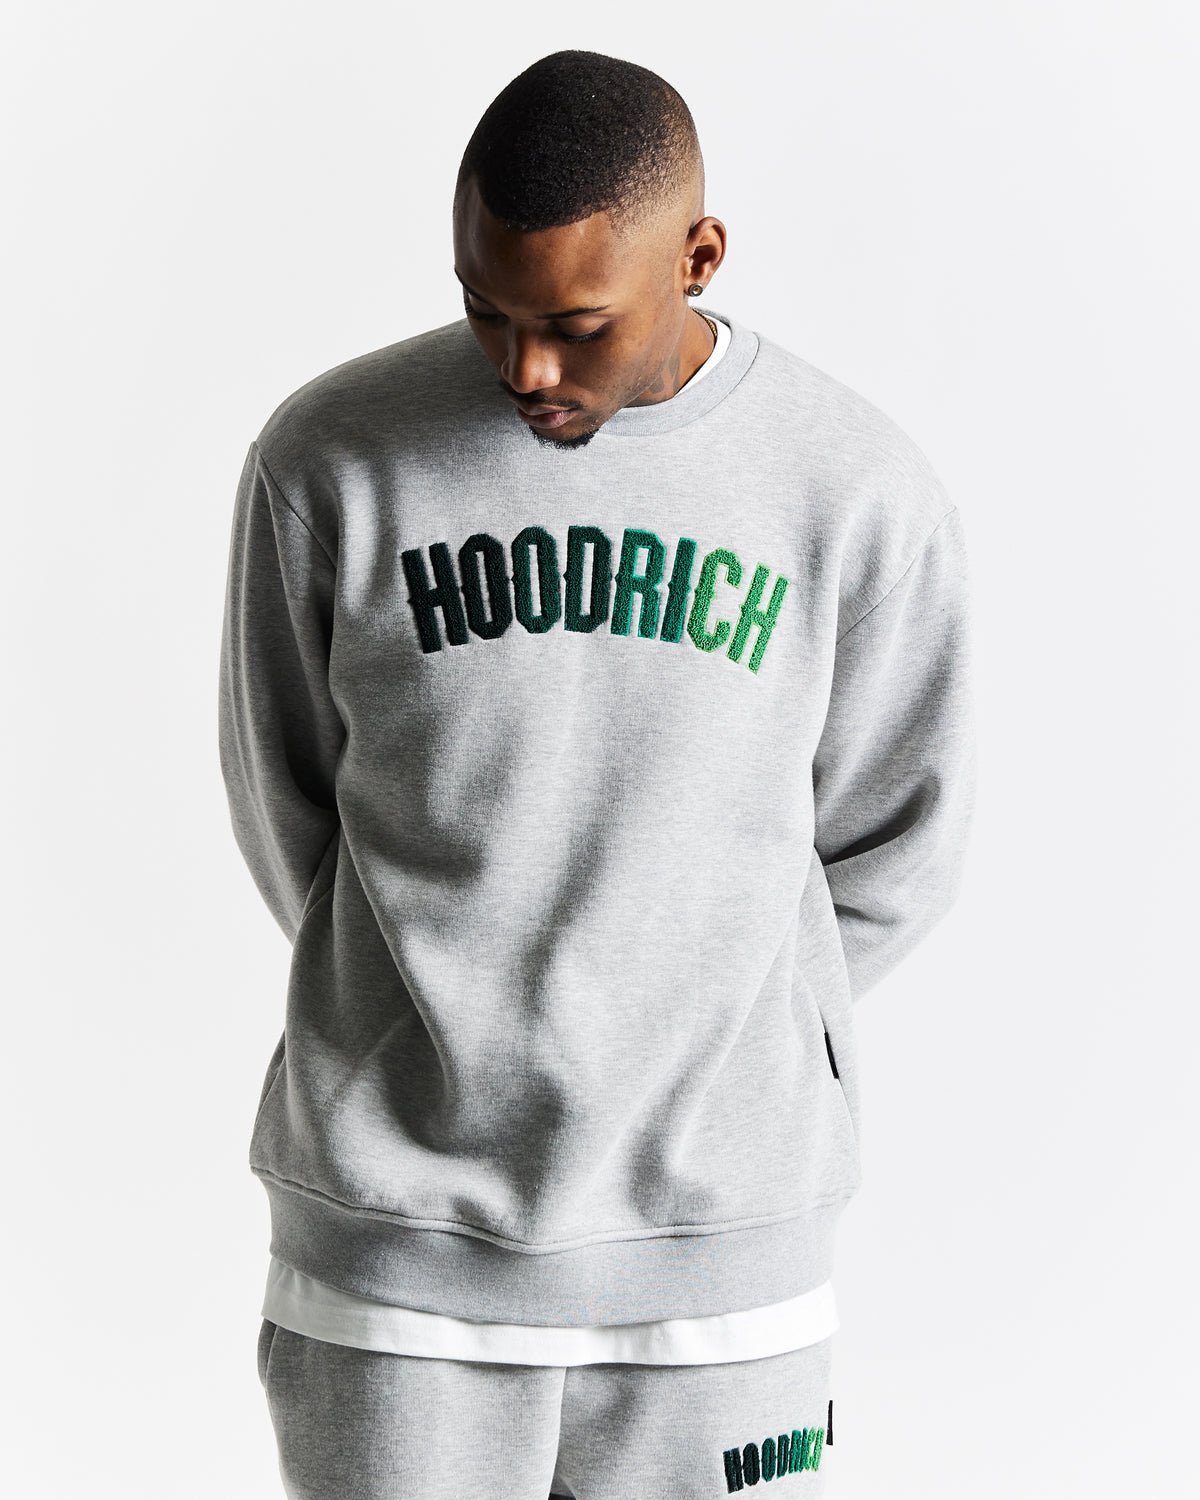 Hoodrich Mens Winter Sports Rhoback Hoodie With Letter Towel Embroidery  Colorful Blue Solid Sweatshirt Sizes C11, 6, MS6A From Monclair_store1,  $14.21